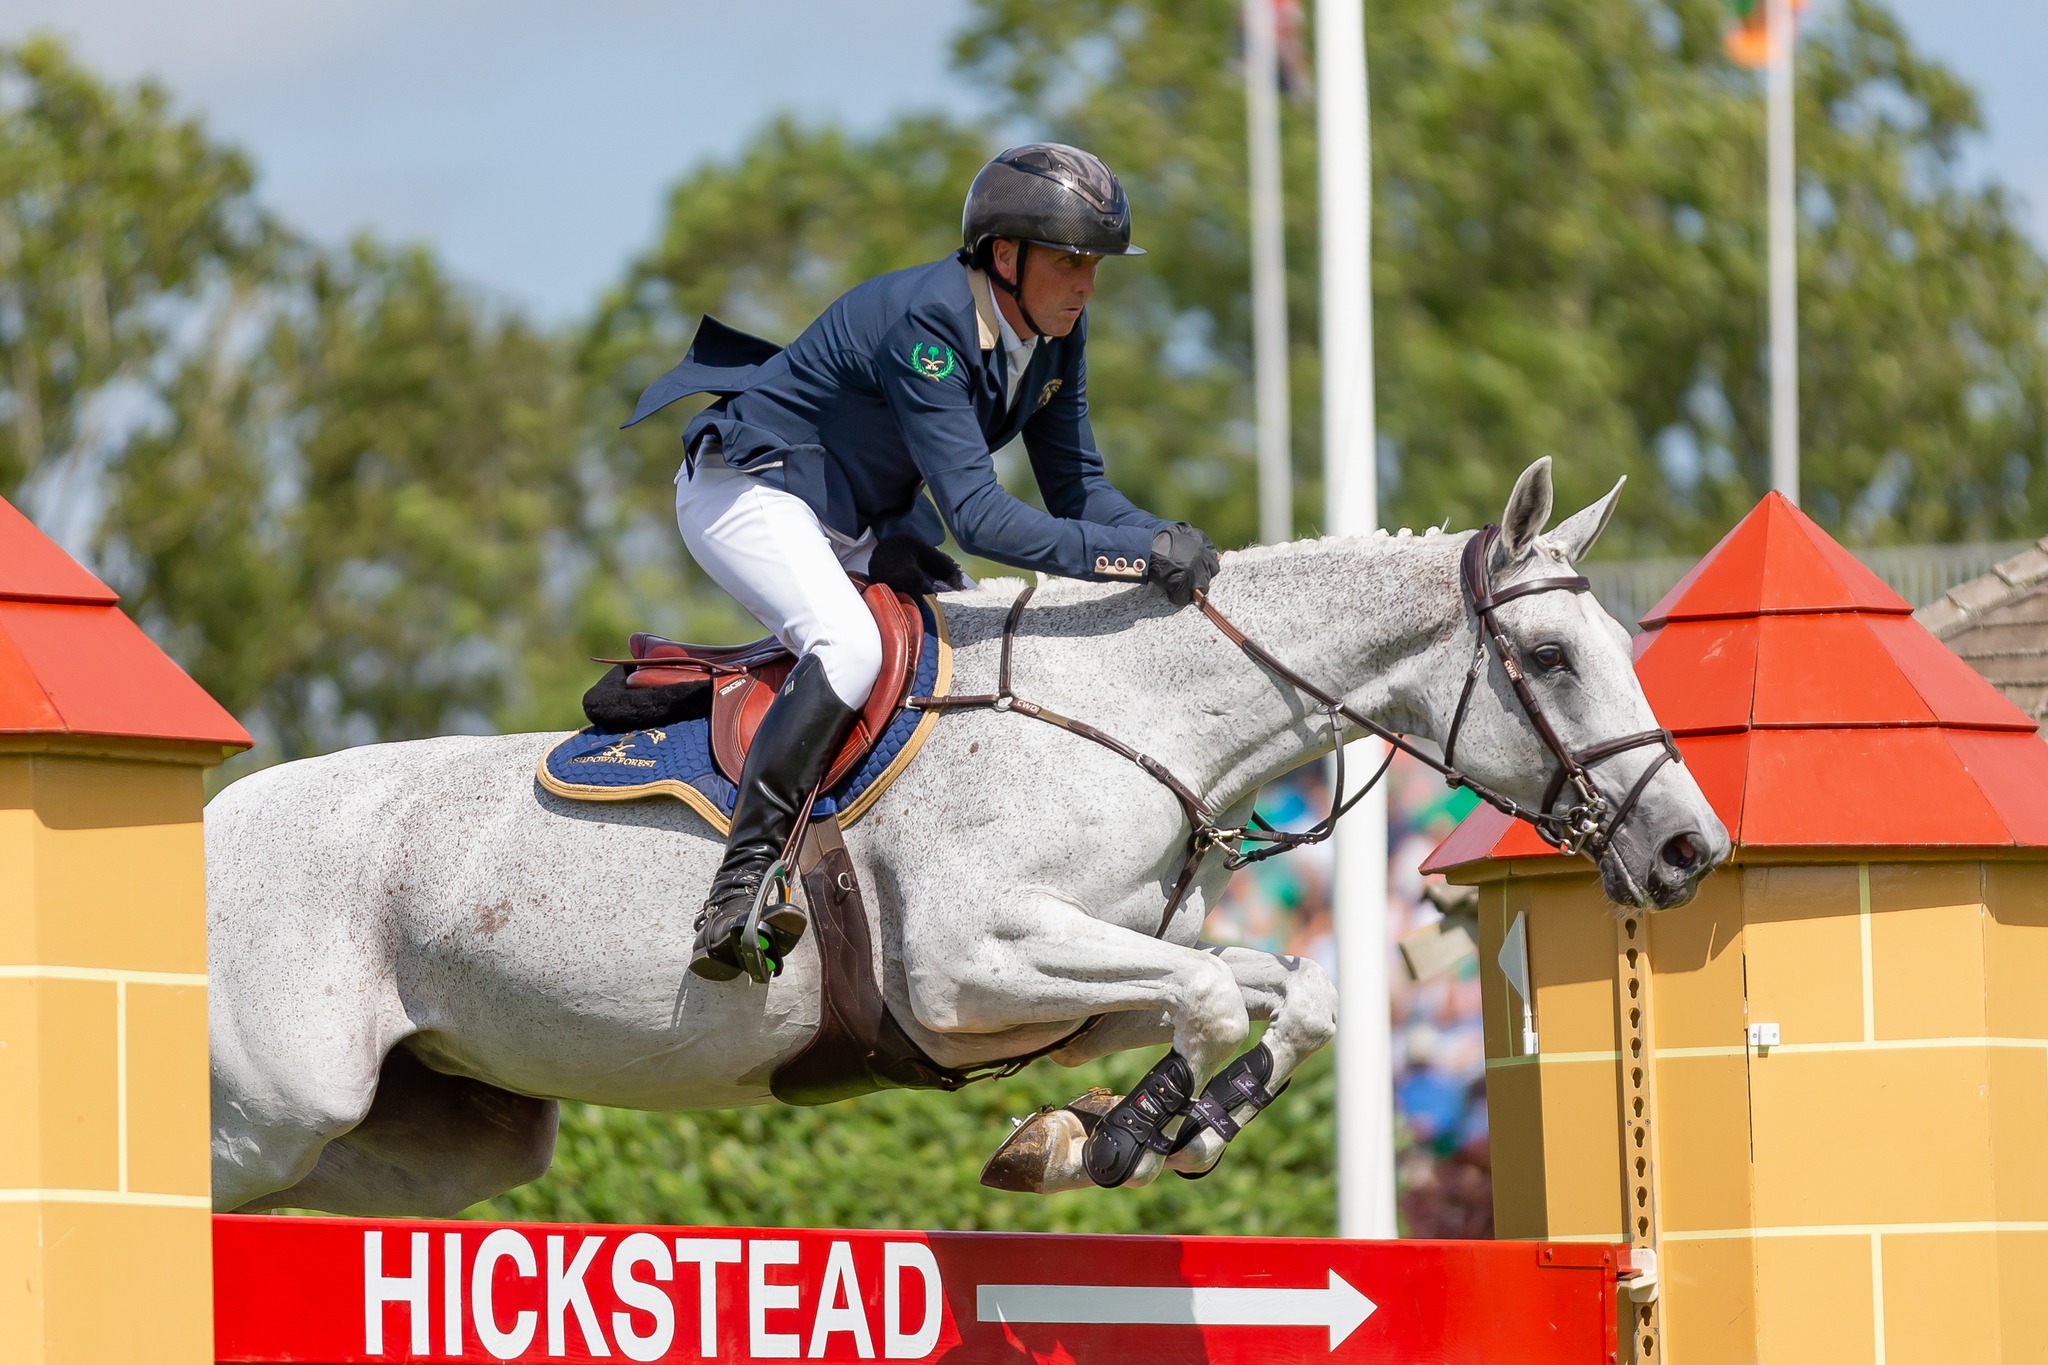 Historic deal kickstarts new era for Hickstead: "Agria is thrilled to become title sponsor of this historic show"